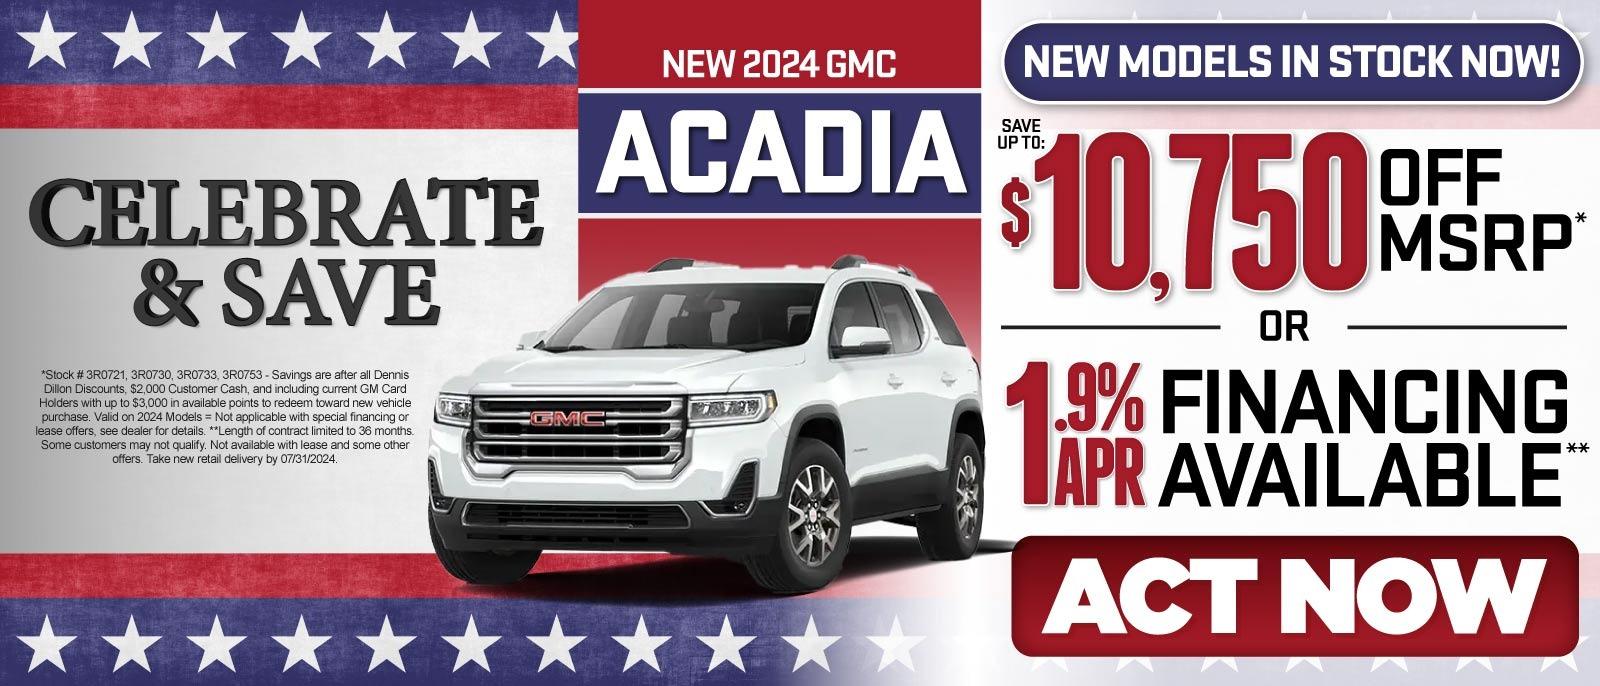 New 2024 GMC Acadia - New Models In Stock Now! | Save Up To: $10,750 Off MSRP* Or 1.9% APR Financing Available** — Act Now